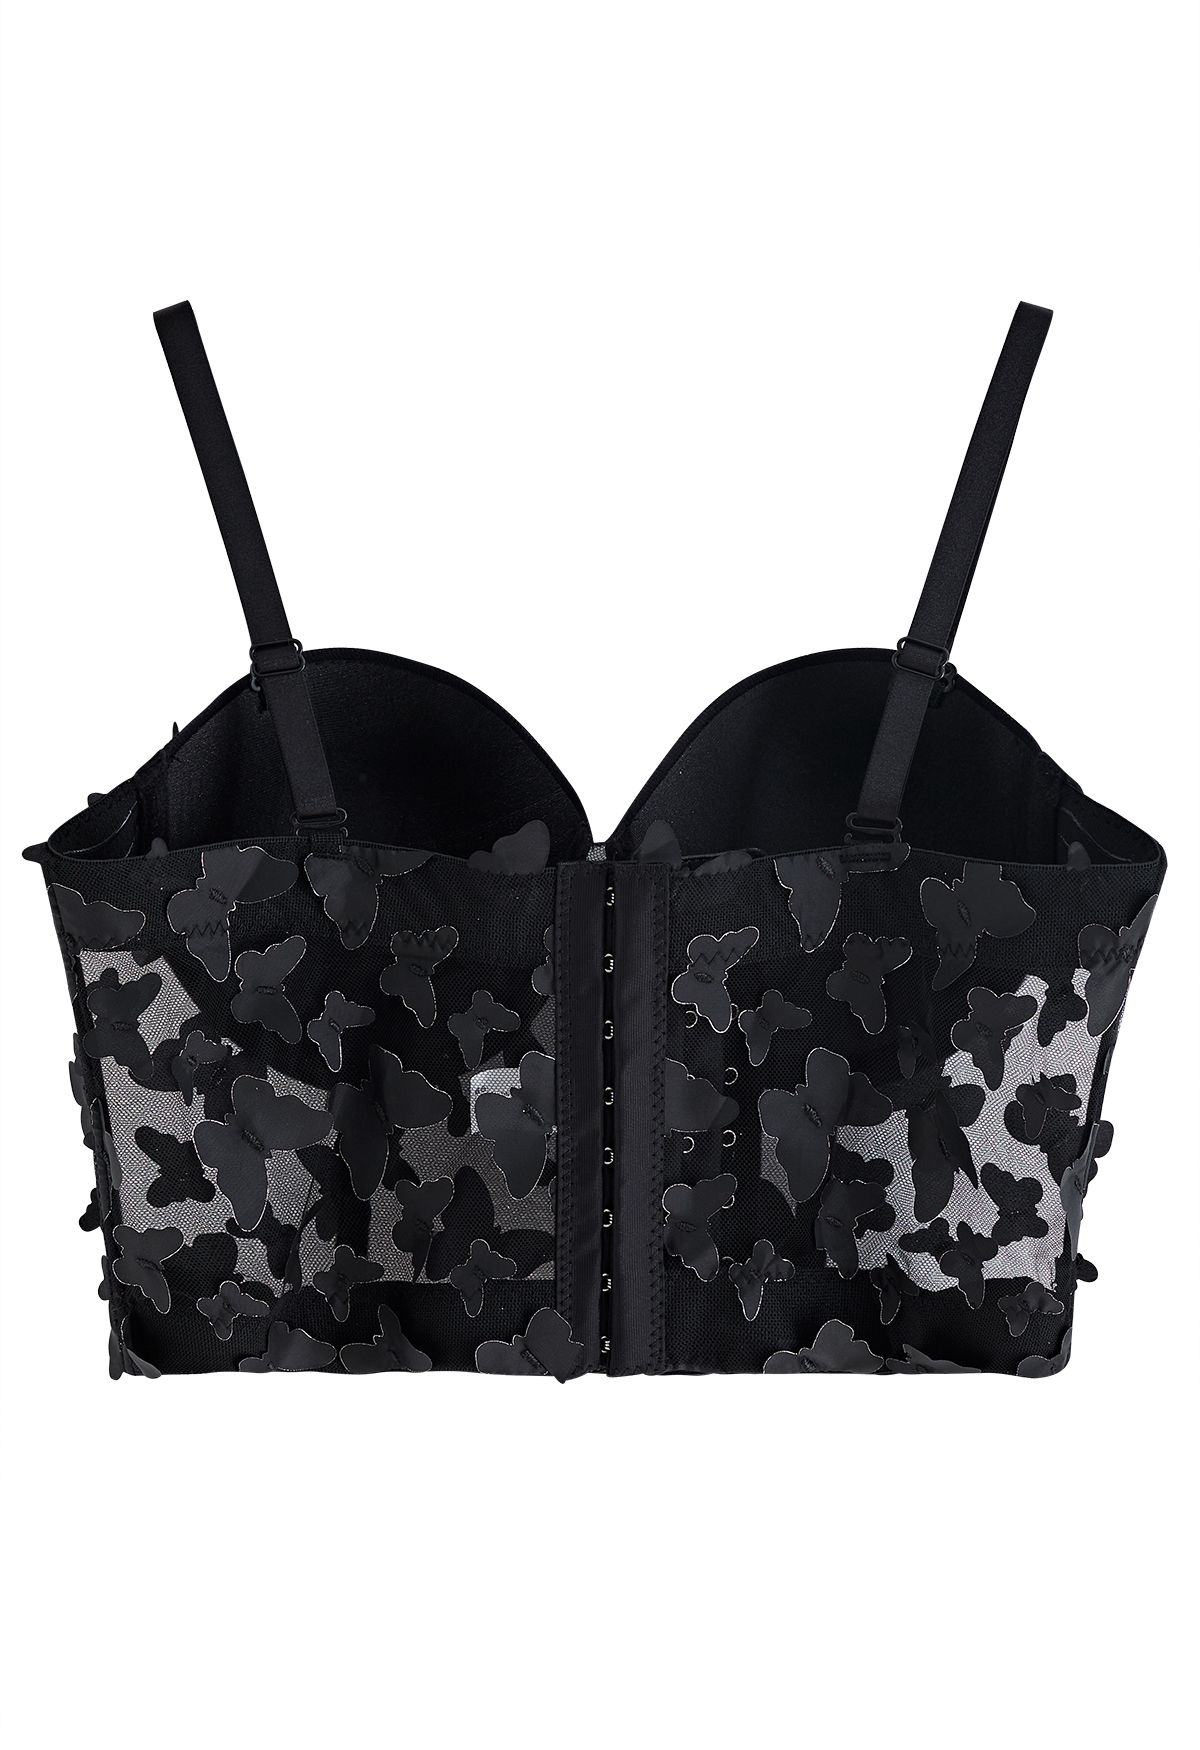 Chicwish Butterfly Appliques Bustier Crop Top in Black Black M